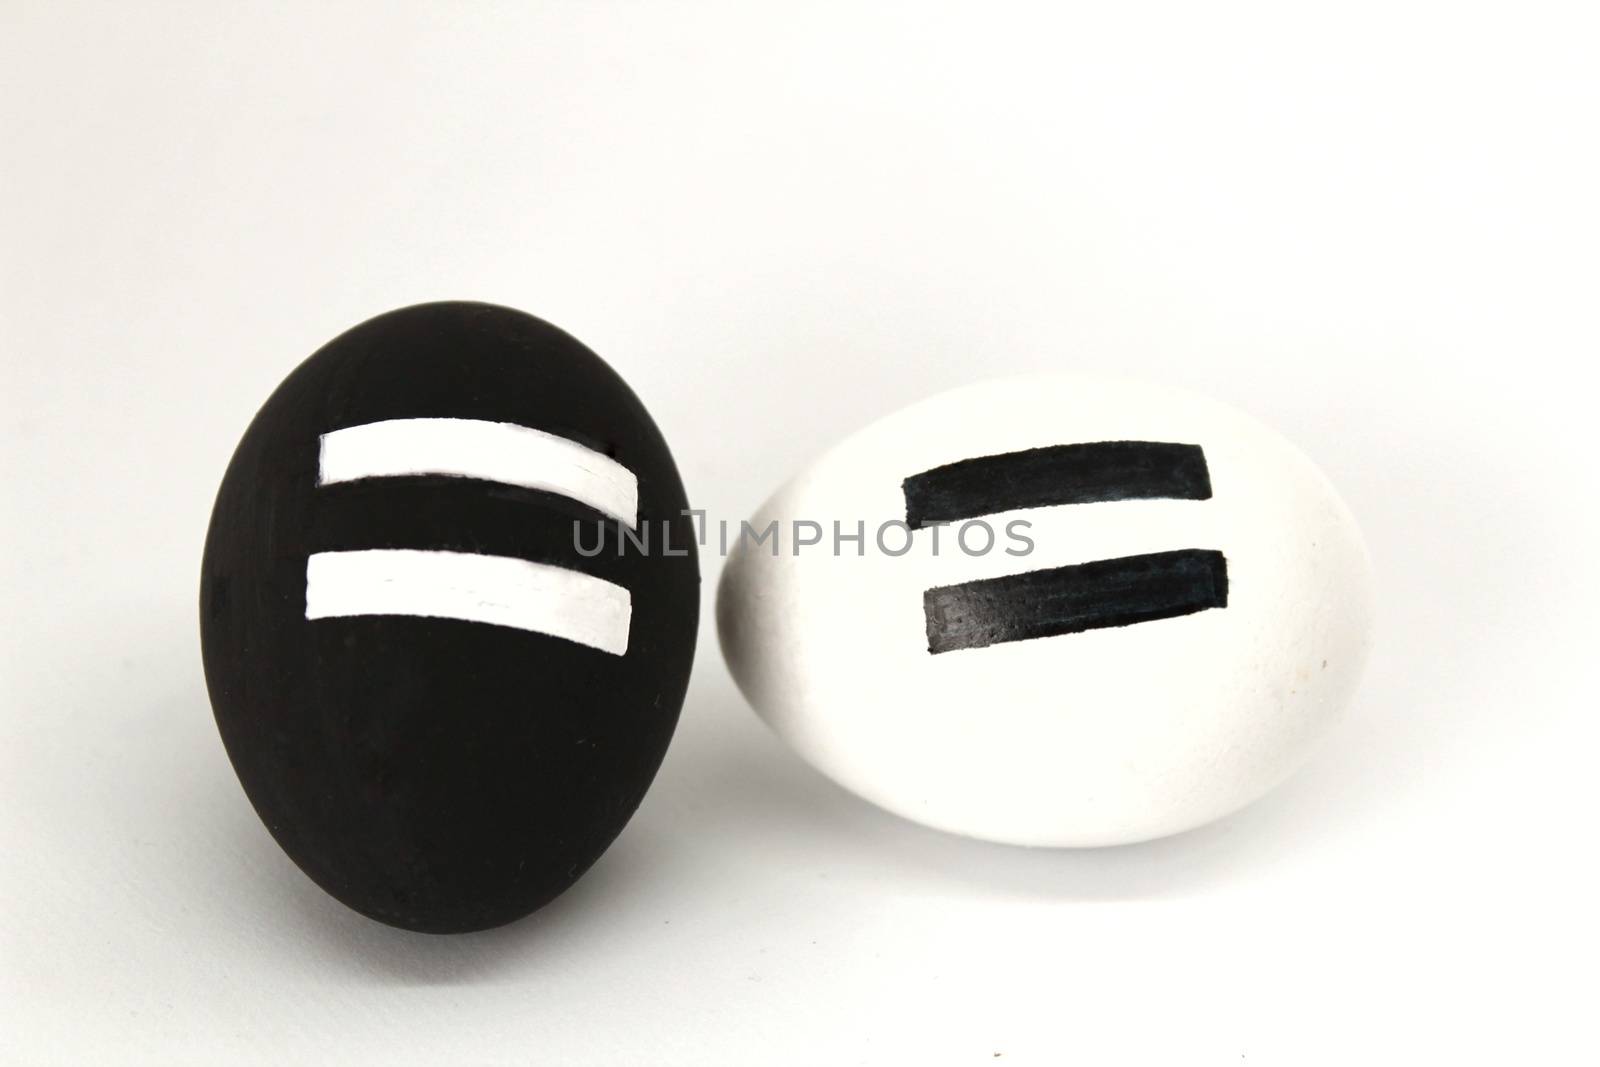 Easter Eggs painted for the Elimination of Racial Discrimination Day by soniabonet